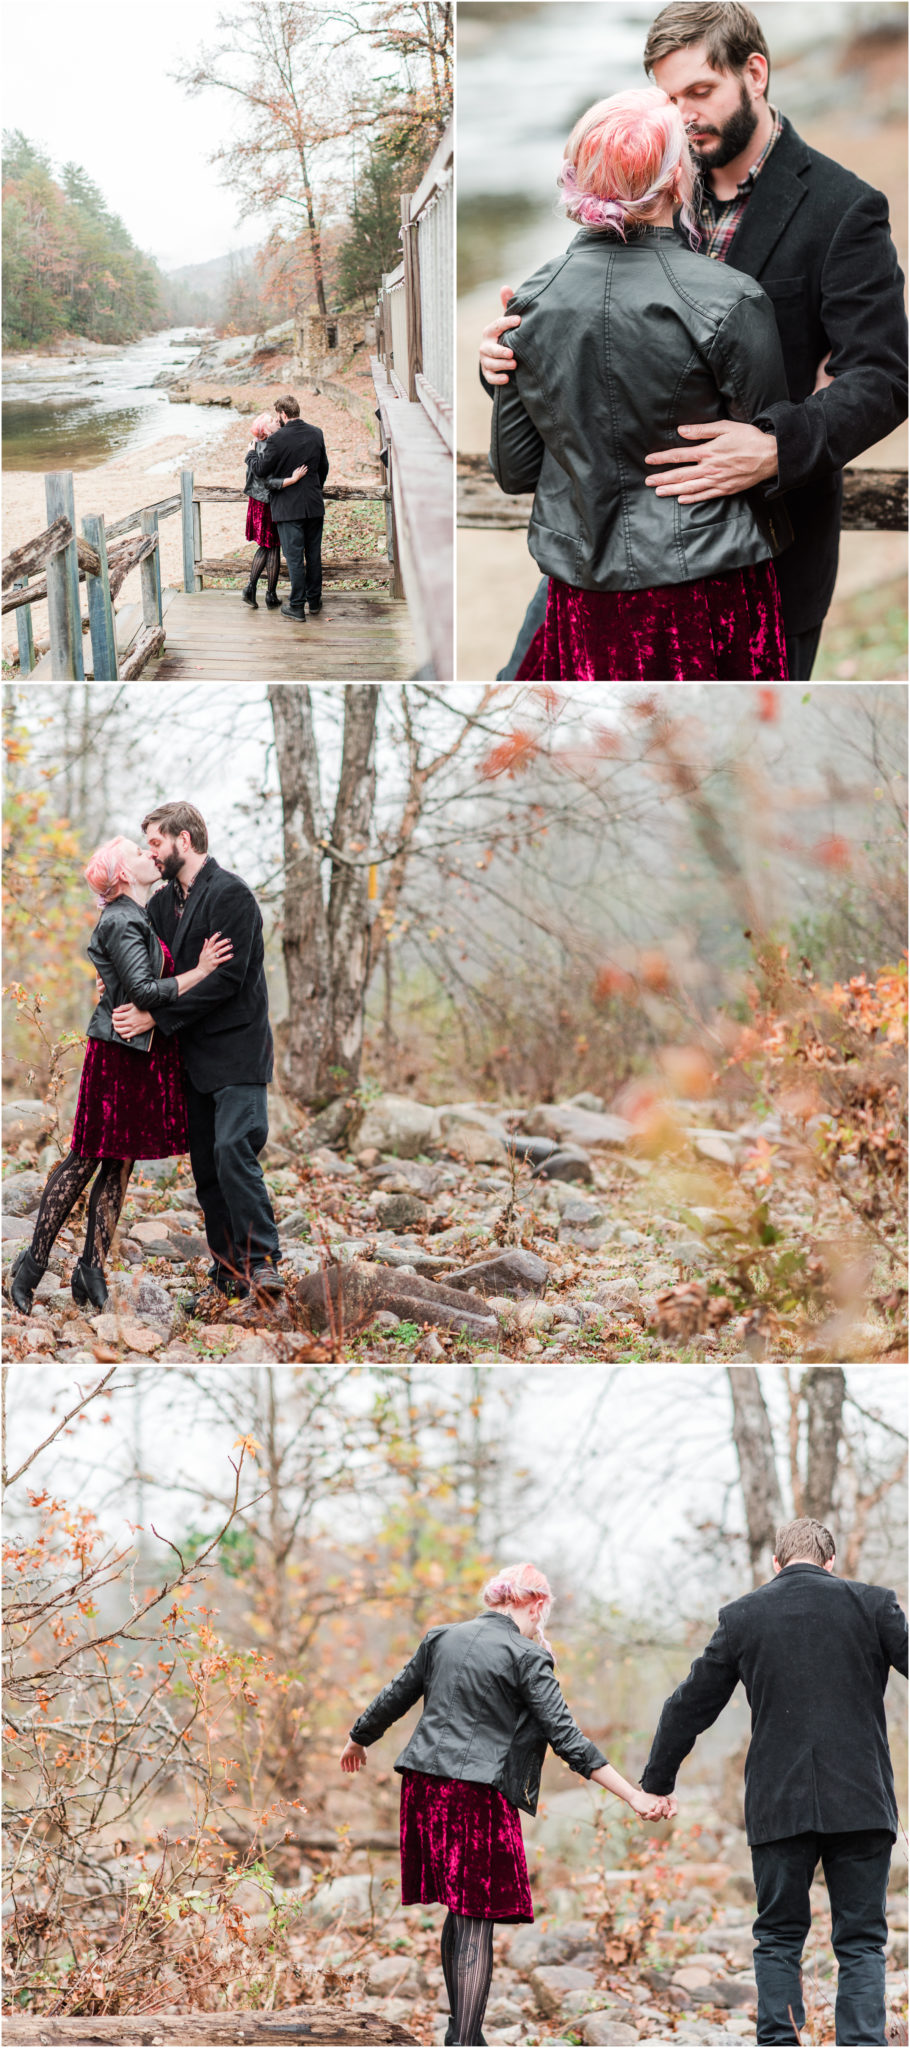 Brown Mountain Beach Resort Engagement Session in Collettsville, North Carolina